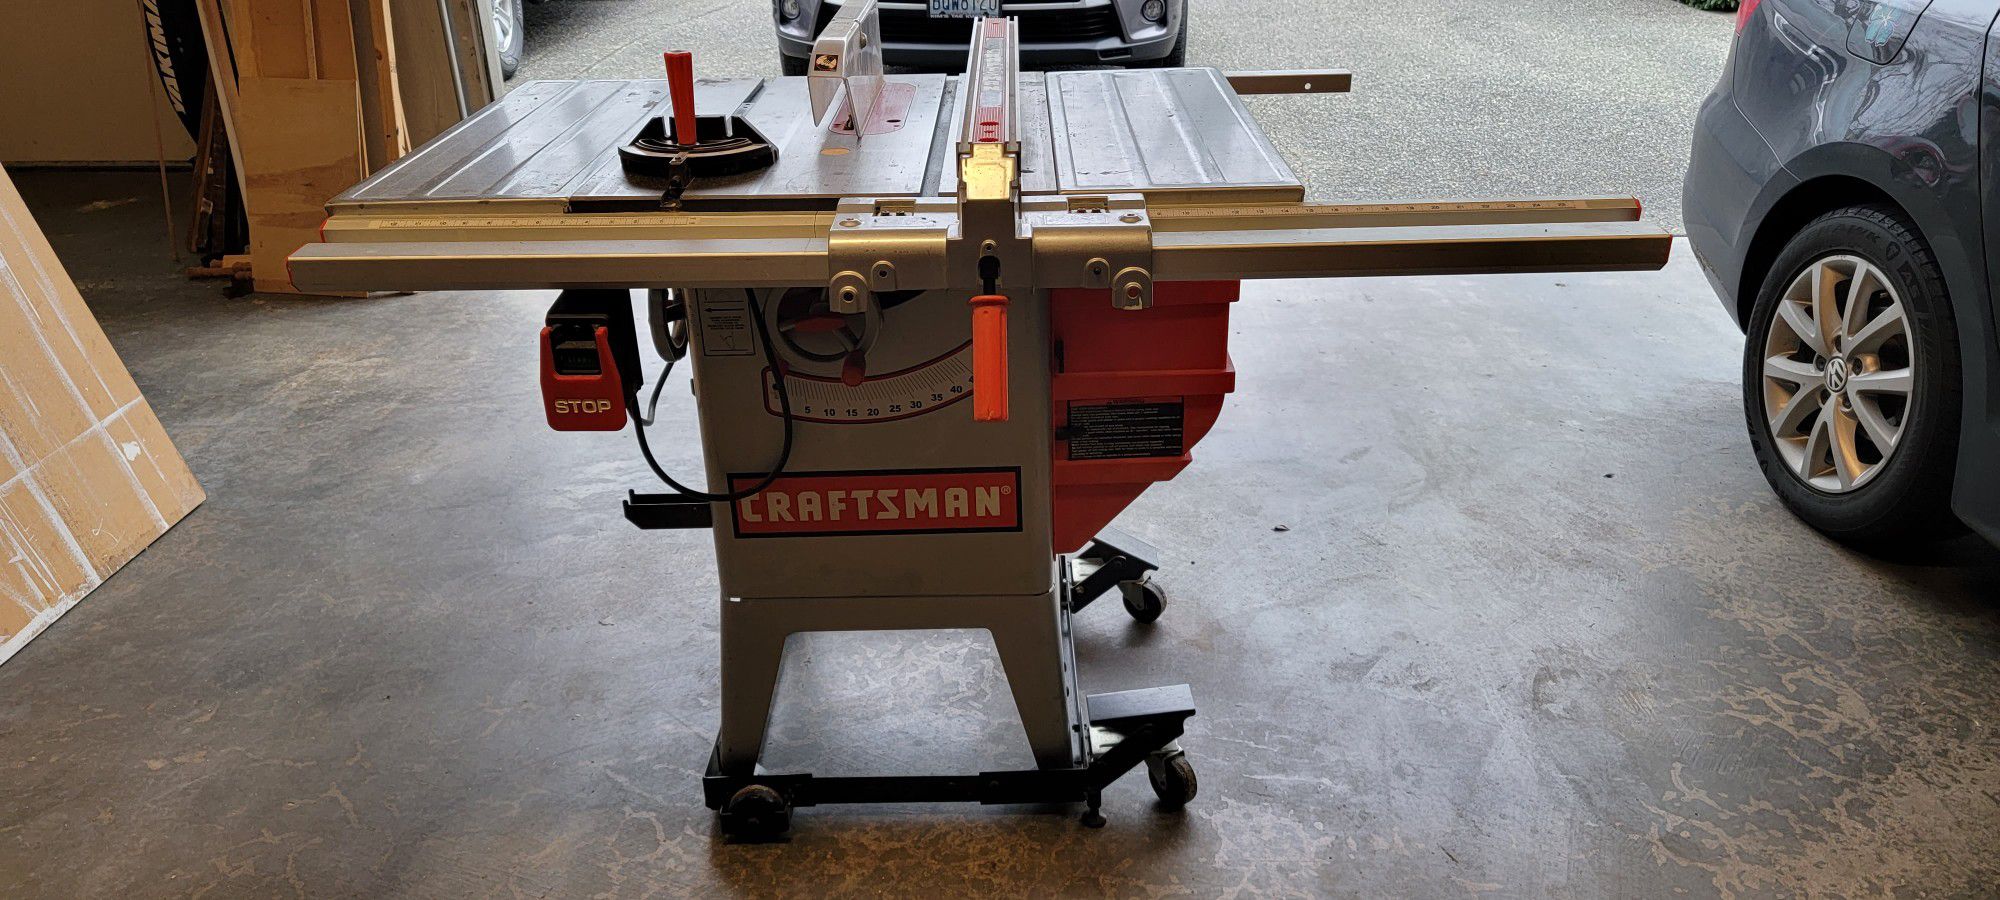 Black and decker firestorm table saw for Sale in Brick, NJ - OfferUp